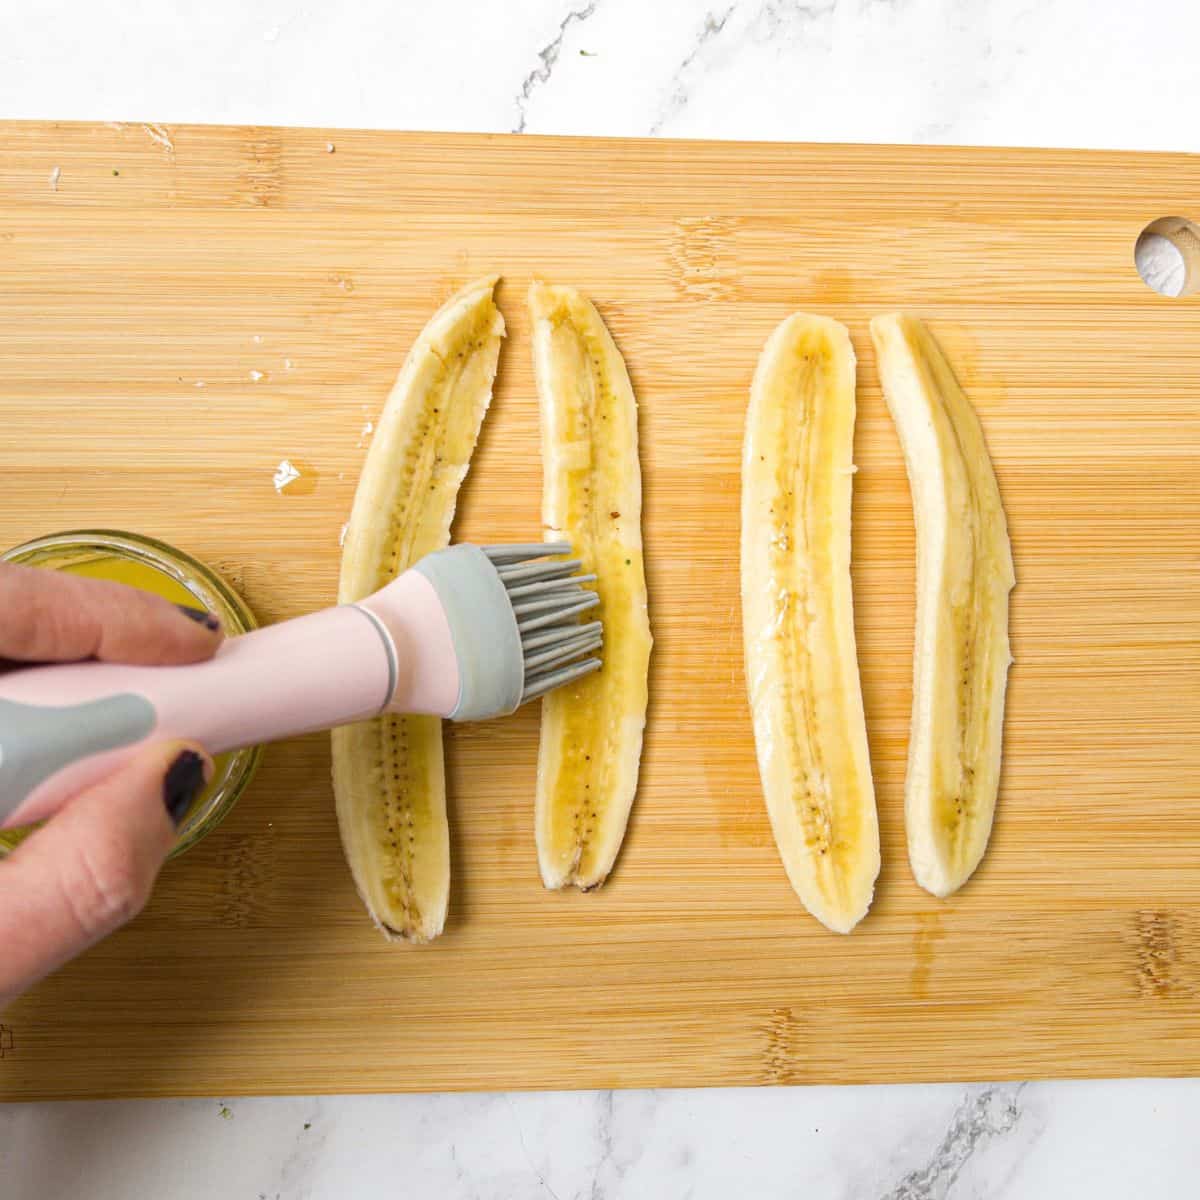 Two bananas sliced lengthways being basted with butter using a pastry brush.